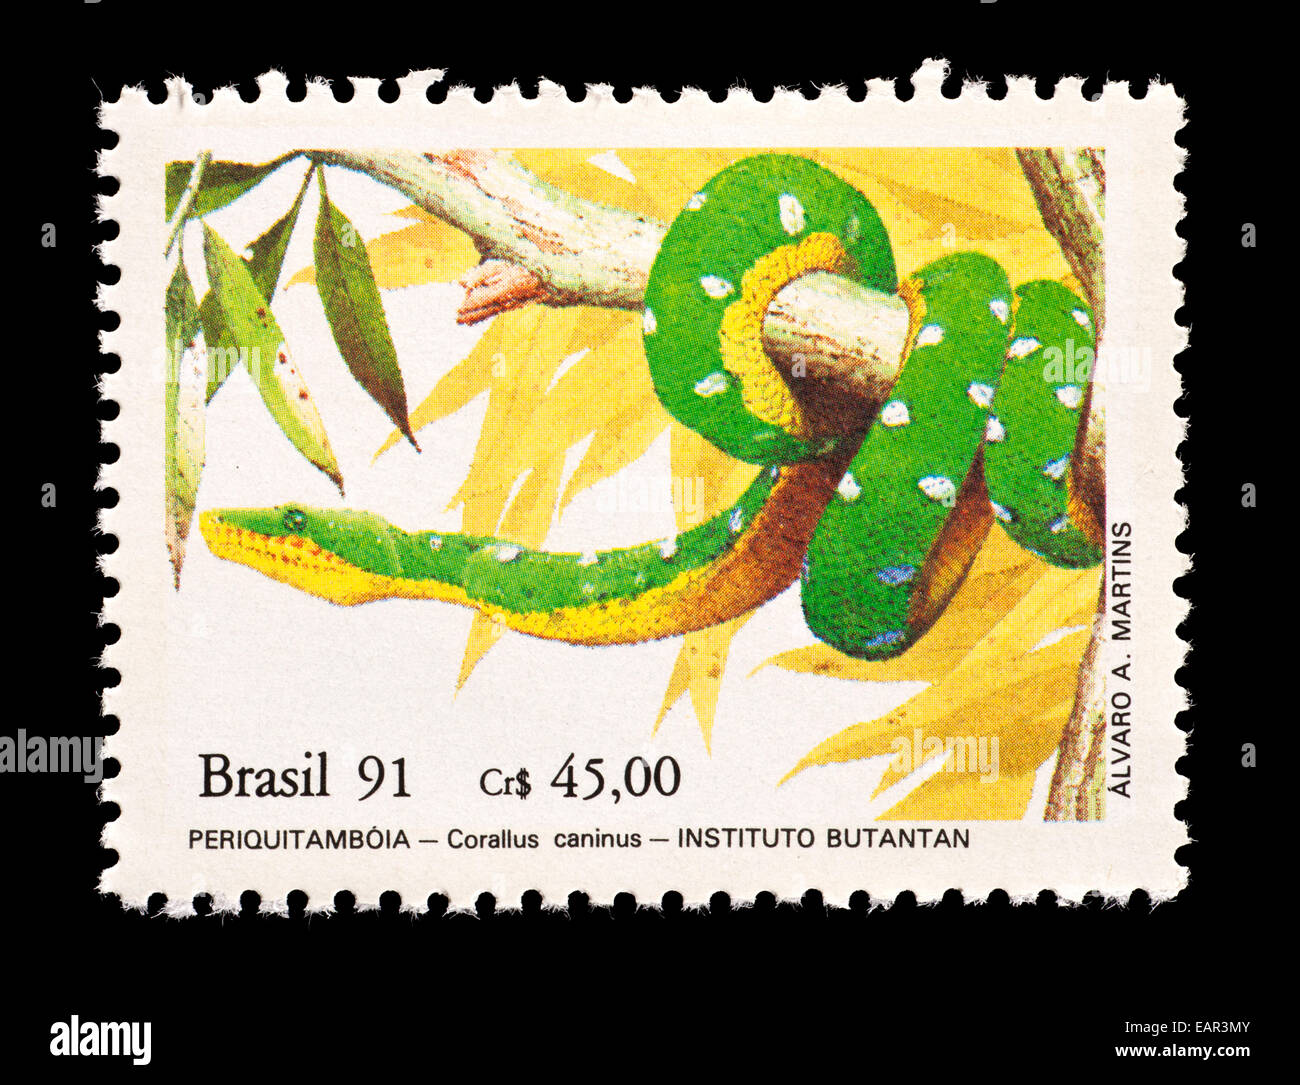 Postage stamp from Brazil depicting emerald tree boa (Corallus caninus) Stock Photo